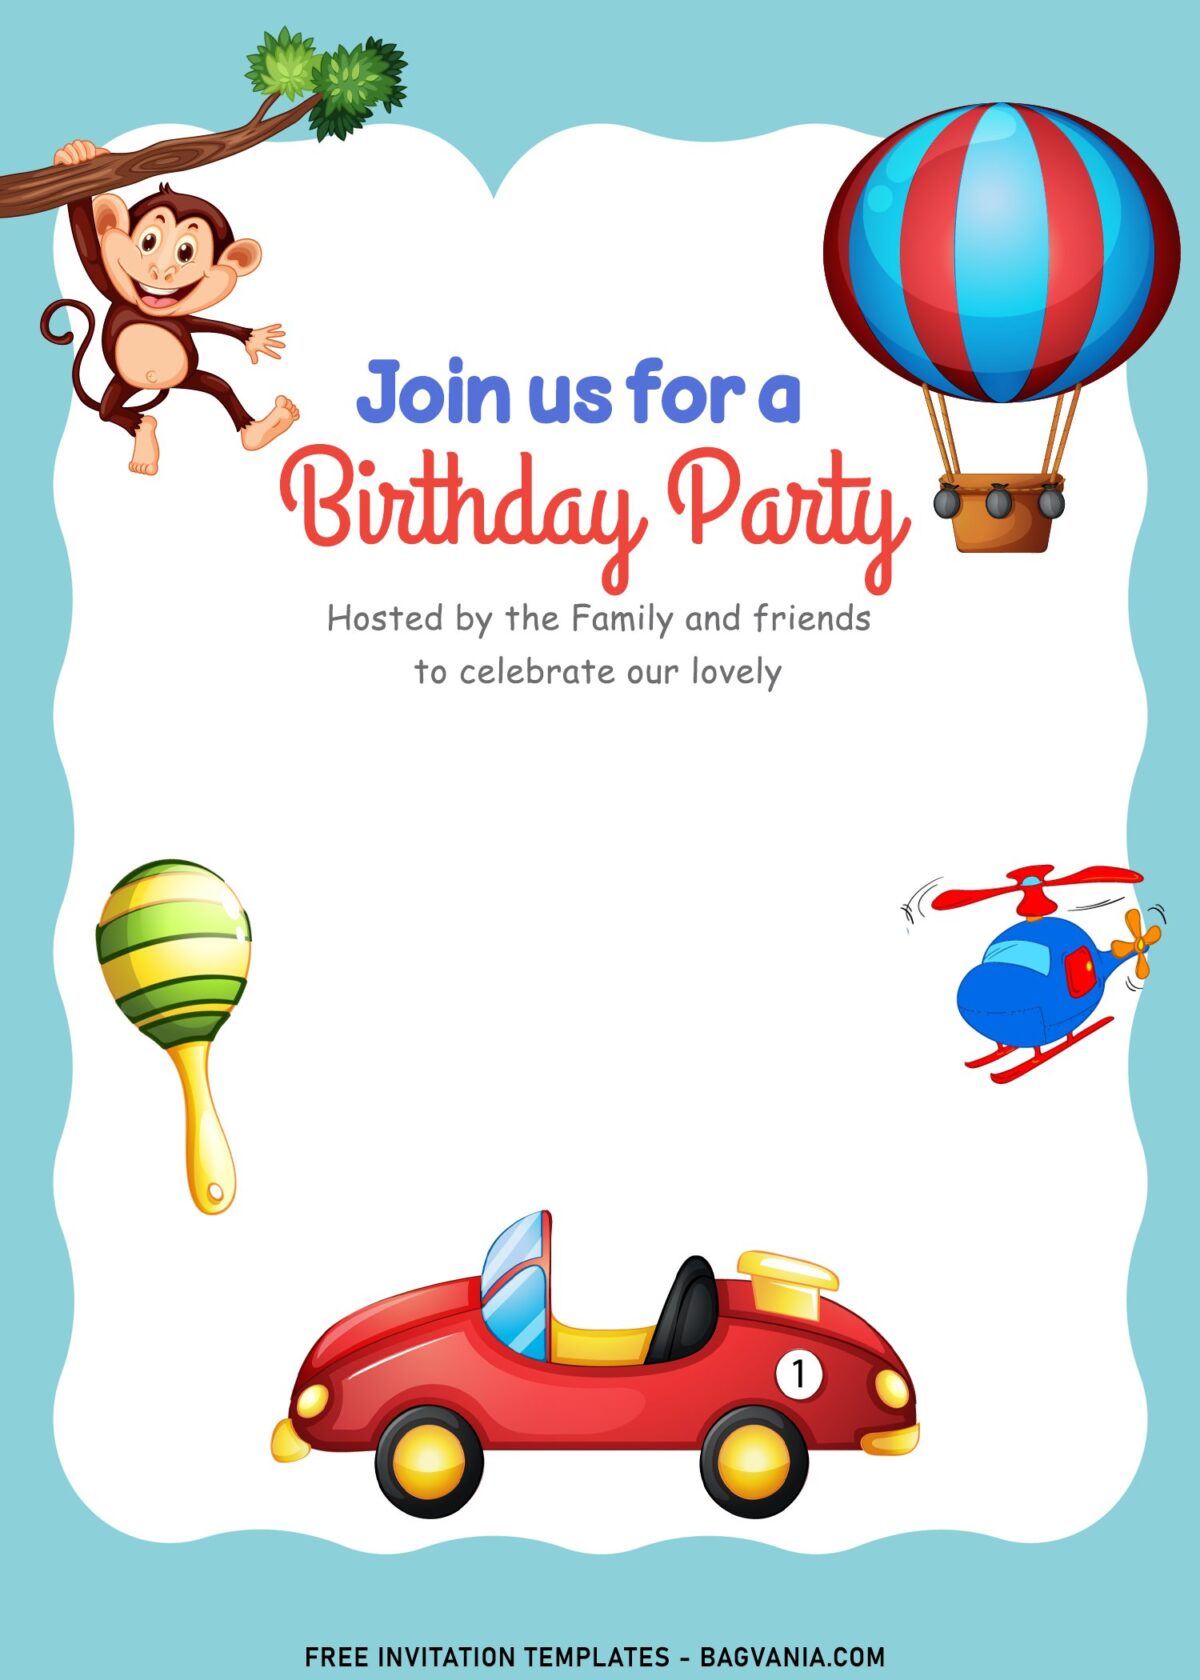 10+ Best And Cute Birthday Invitation Templates For Preschooler with car toys